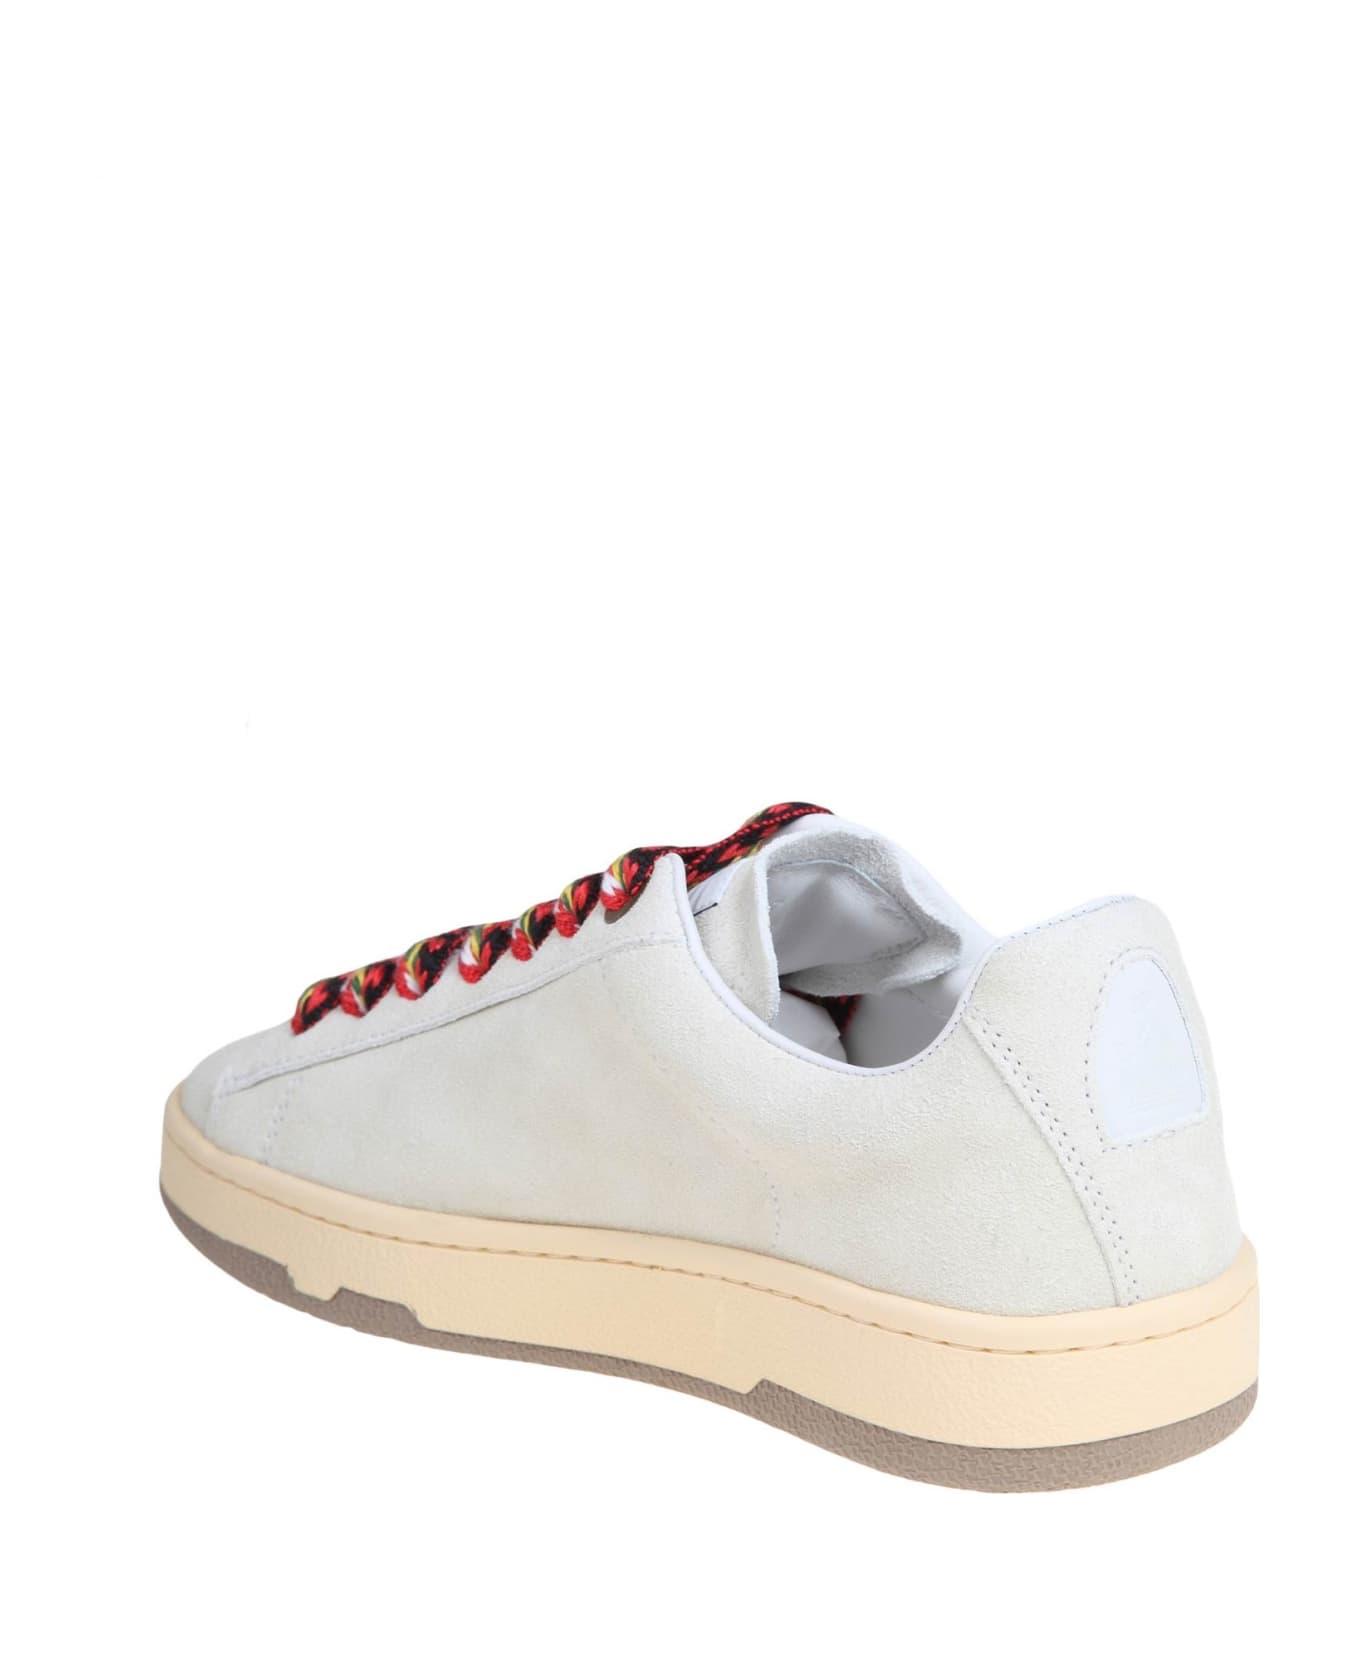 Lanvin Lite Curb Sneakers In Leather Color White - White スニーカー